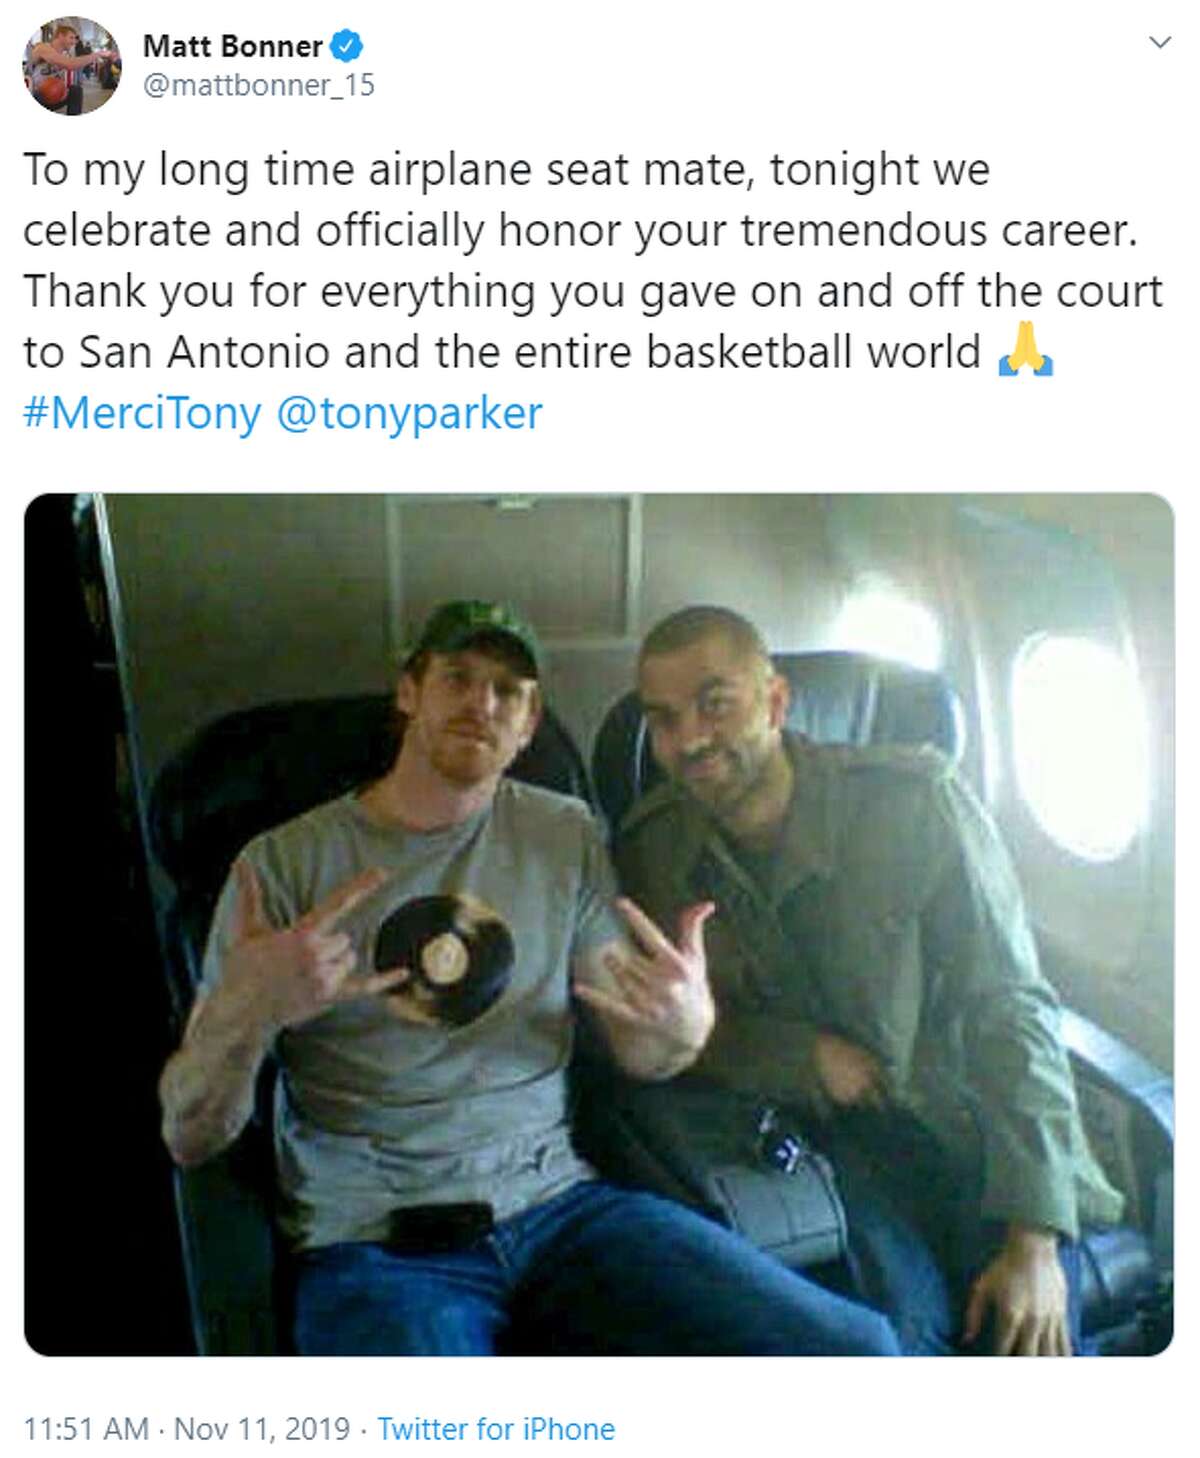 @mattbonner_15: To my long time airplane seat mate, tonight we celebrate and officially honor your tremendous career. Thank you for everything you gave on and off the court to San Antonio and the entire basketball world #MerciTony @tonyparker